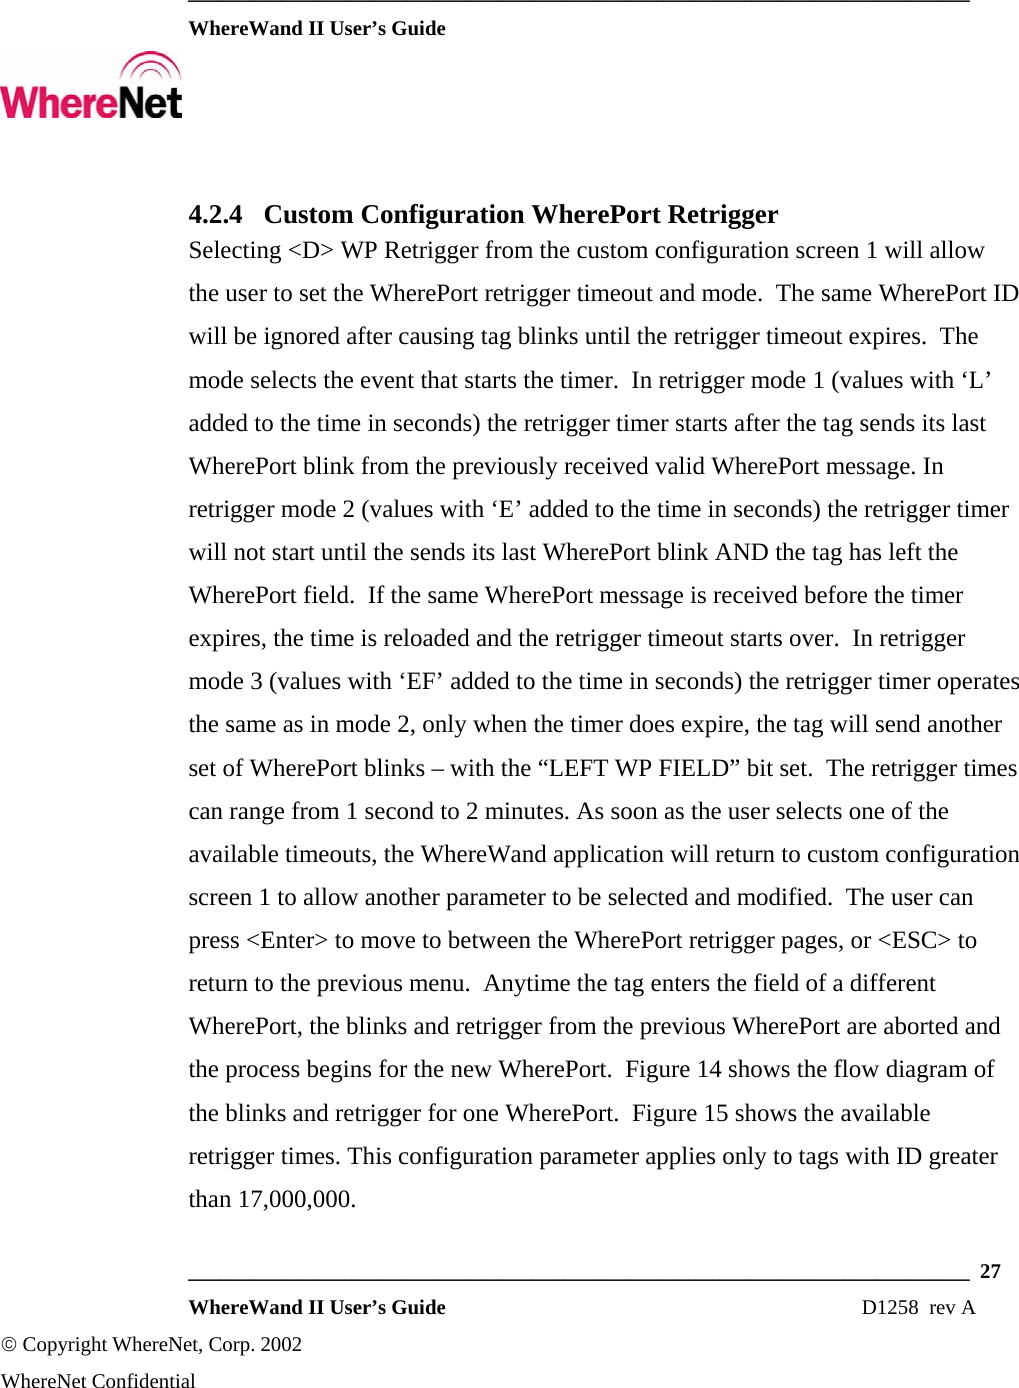  ___________________________________________________________________________  WhereWand II User’s Guide     ___________________________________________________________________________  27  WhereWand II User’s Guide                                                                          D1258  rev A © Copyright WhereNet, Corp. 2002  WhereNet Confidential 4.2.4 Custom Configuration WherePort Retrigger Selecting &lt;D&gt; WP Retrigger from the custom configuration screen 1 will allow the user to set the WherePort retrigger timeout and mode.  The same WherePort ID will be ignored after causing tag blinks until the retrigger timeout expires.  The mode selects the event that starts the timer.  In retrigger mode 1 (values with ‘L’ added to the time in seconds) the retrigger timer starts after the tag sends its last WherePort blink from the previously received valid WherePort message. In retrigger mode 2 (values with ‘E’ added to the time in seconds) the retrigger timer will not start until the sends its last WherePort blink AND the tag has left the WherePort field.  If the same WherePort message is received before the timer expires, the time is reloaded and the retrigger timeout starts over.  In retrigger mode 3 (values with ‘EF’ added to the time in seconds) the retrigger timer operates the same as in mode 2, only when the timer does expire, the tag will send another set of WherePort blinks – with the “LEFT WP FIELD” bit set.  The retrigger times can range from 1 second to 2 minutes. As soon as the user selects one of the available timeouts, the WhereWand application will return to custom configuration screen 1 to allow another parameter to be selected and modified.  The user can press &lt;Enter&gt; to move to between the WherePort retrigger pages, or &lt;ESC&gt; to return to the previous menu.  Anytime the tag enters the field of a different WherePort, the blinks and retrigger from the previous WherePort are aborted and the process begins for the new WherePort.  Figure 14 shows the flow diagram of the blinks and retrigger for one WherePort.  Figure 15 shows the available retrigger times. This configuration parameter applies only to tags with ID greater than 17,000,000.